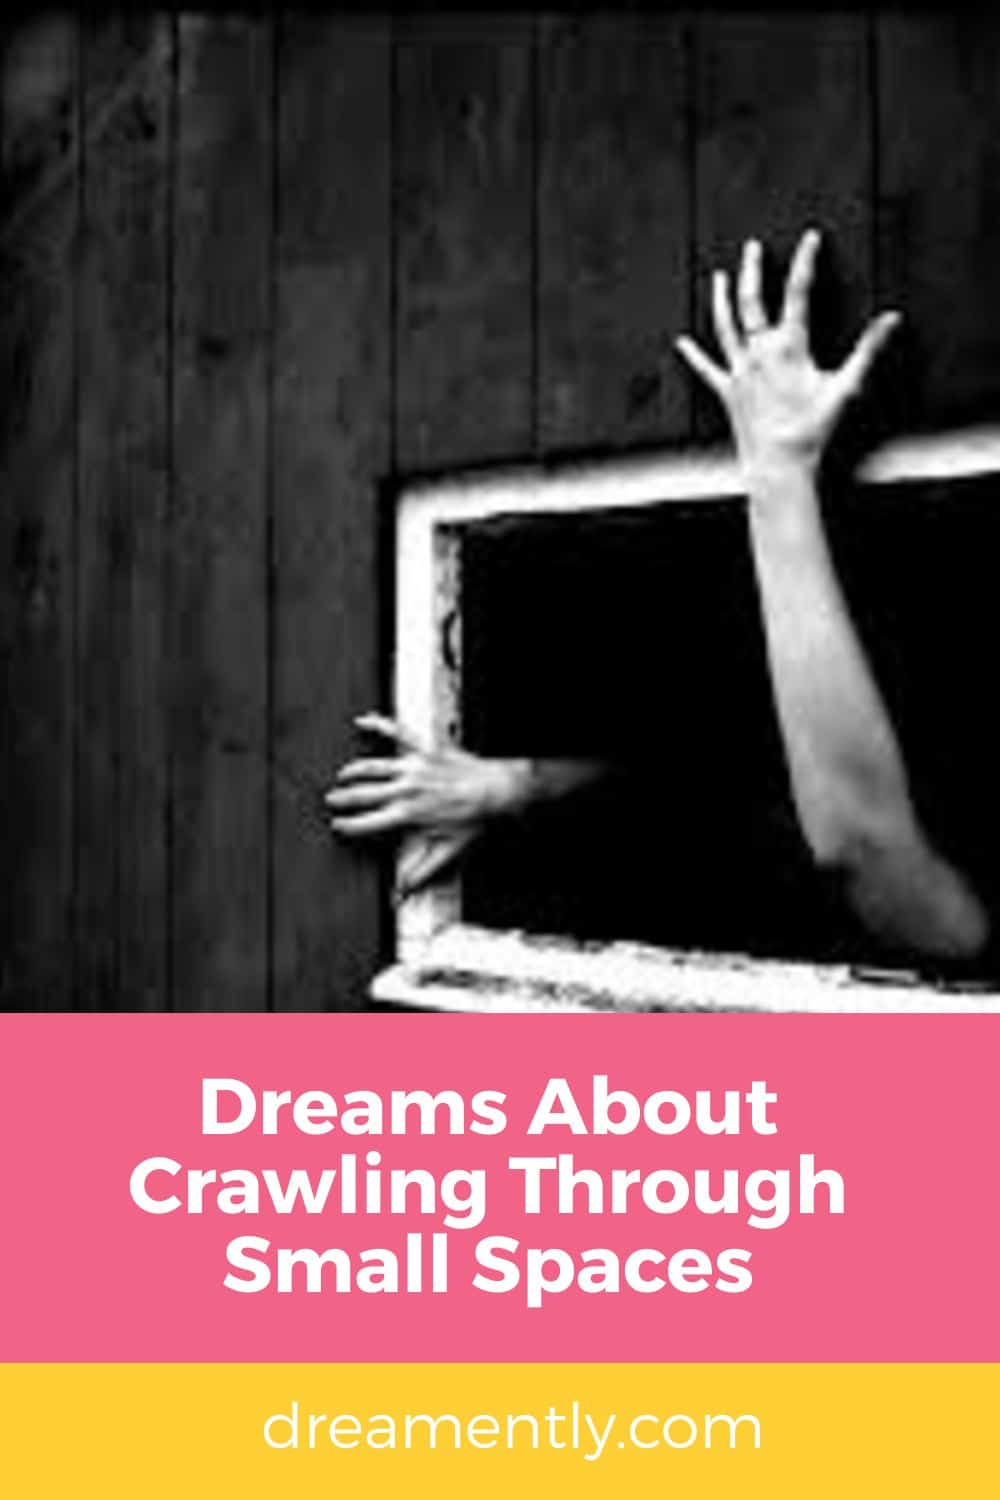 Dreams About Crawling Through Small Spaces